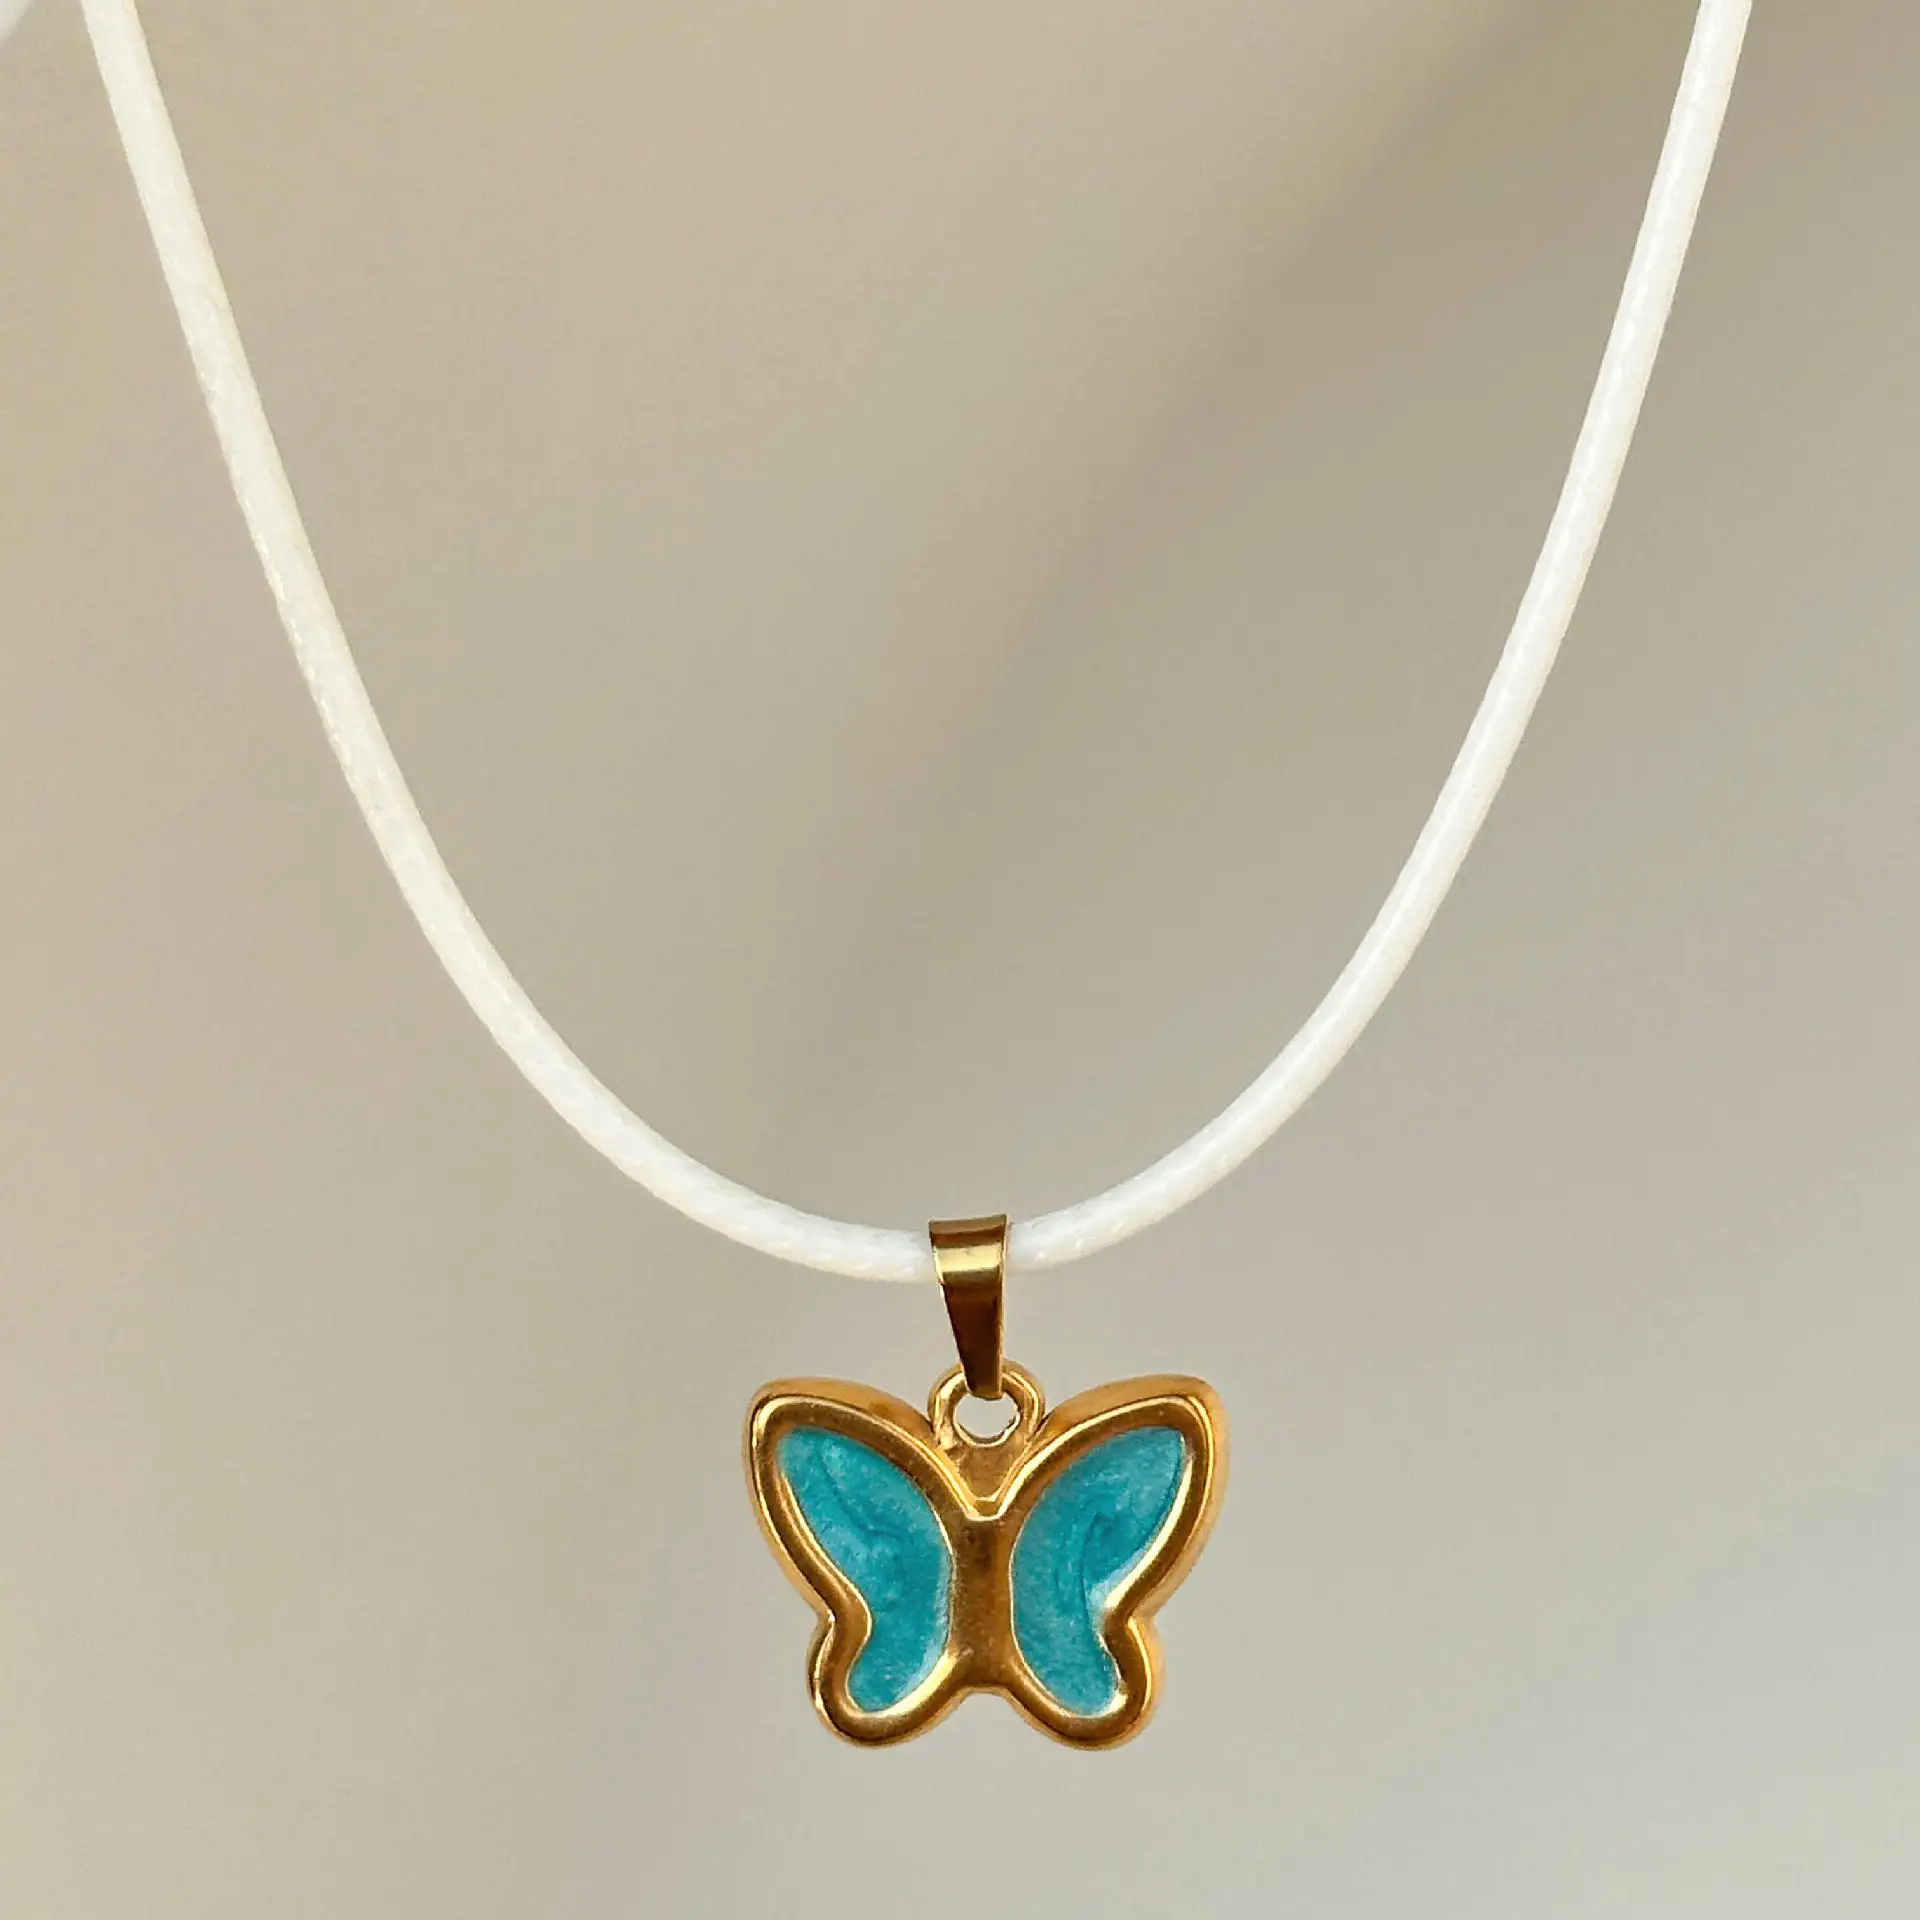 new fashion leather necklace cord 18k gold plated enamel butterfly choker necklace